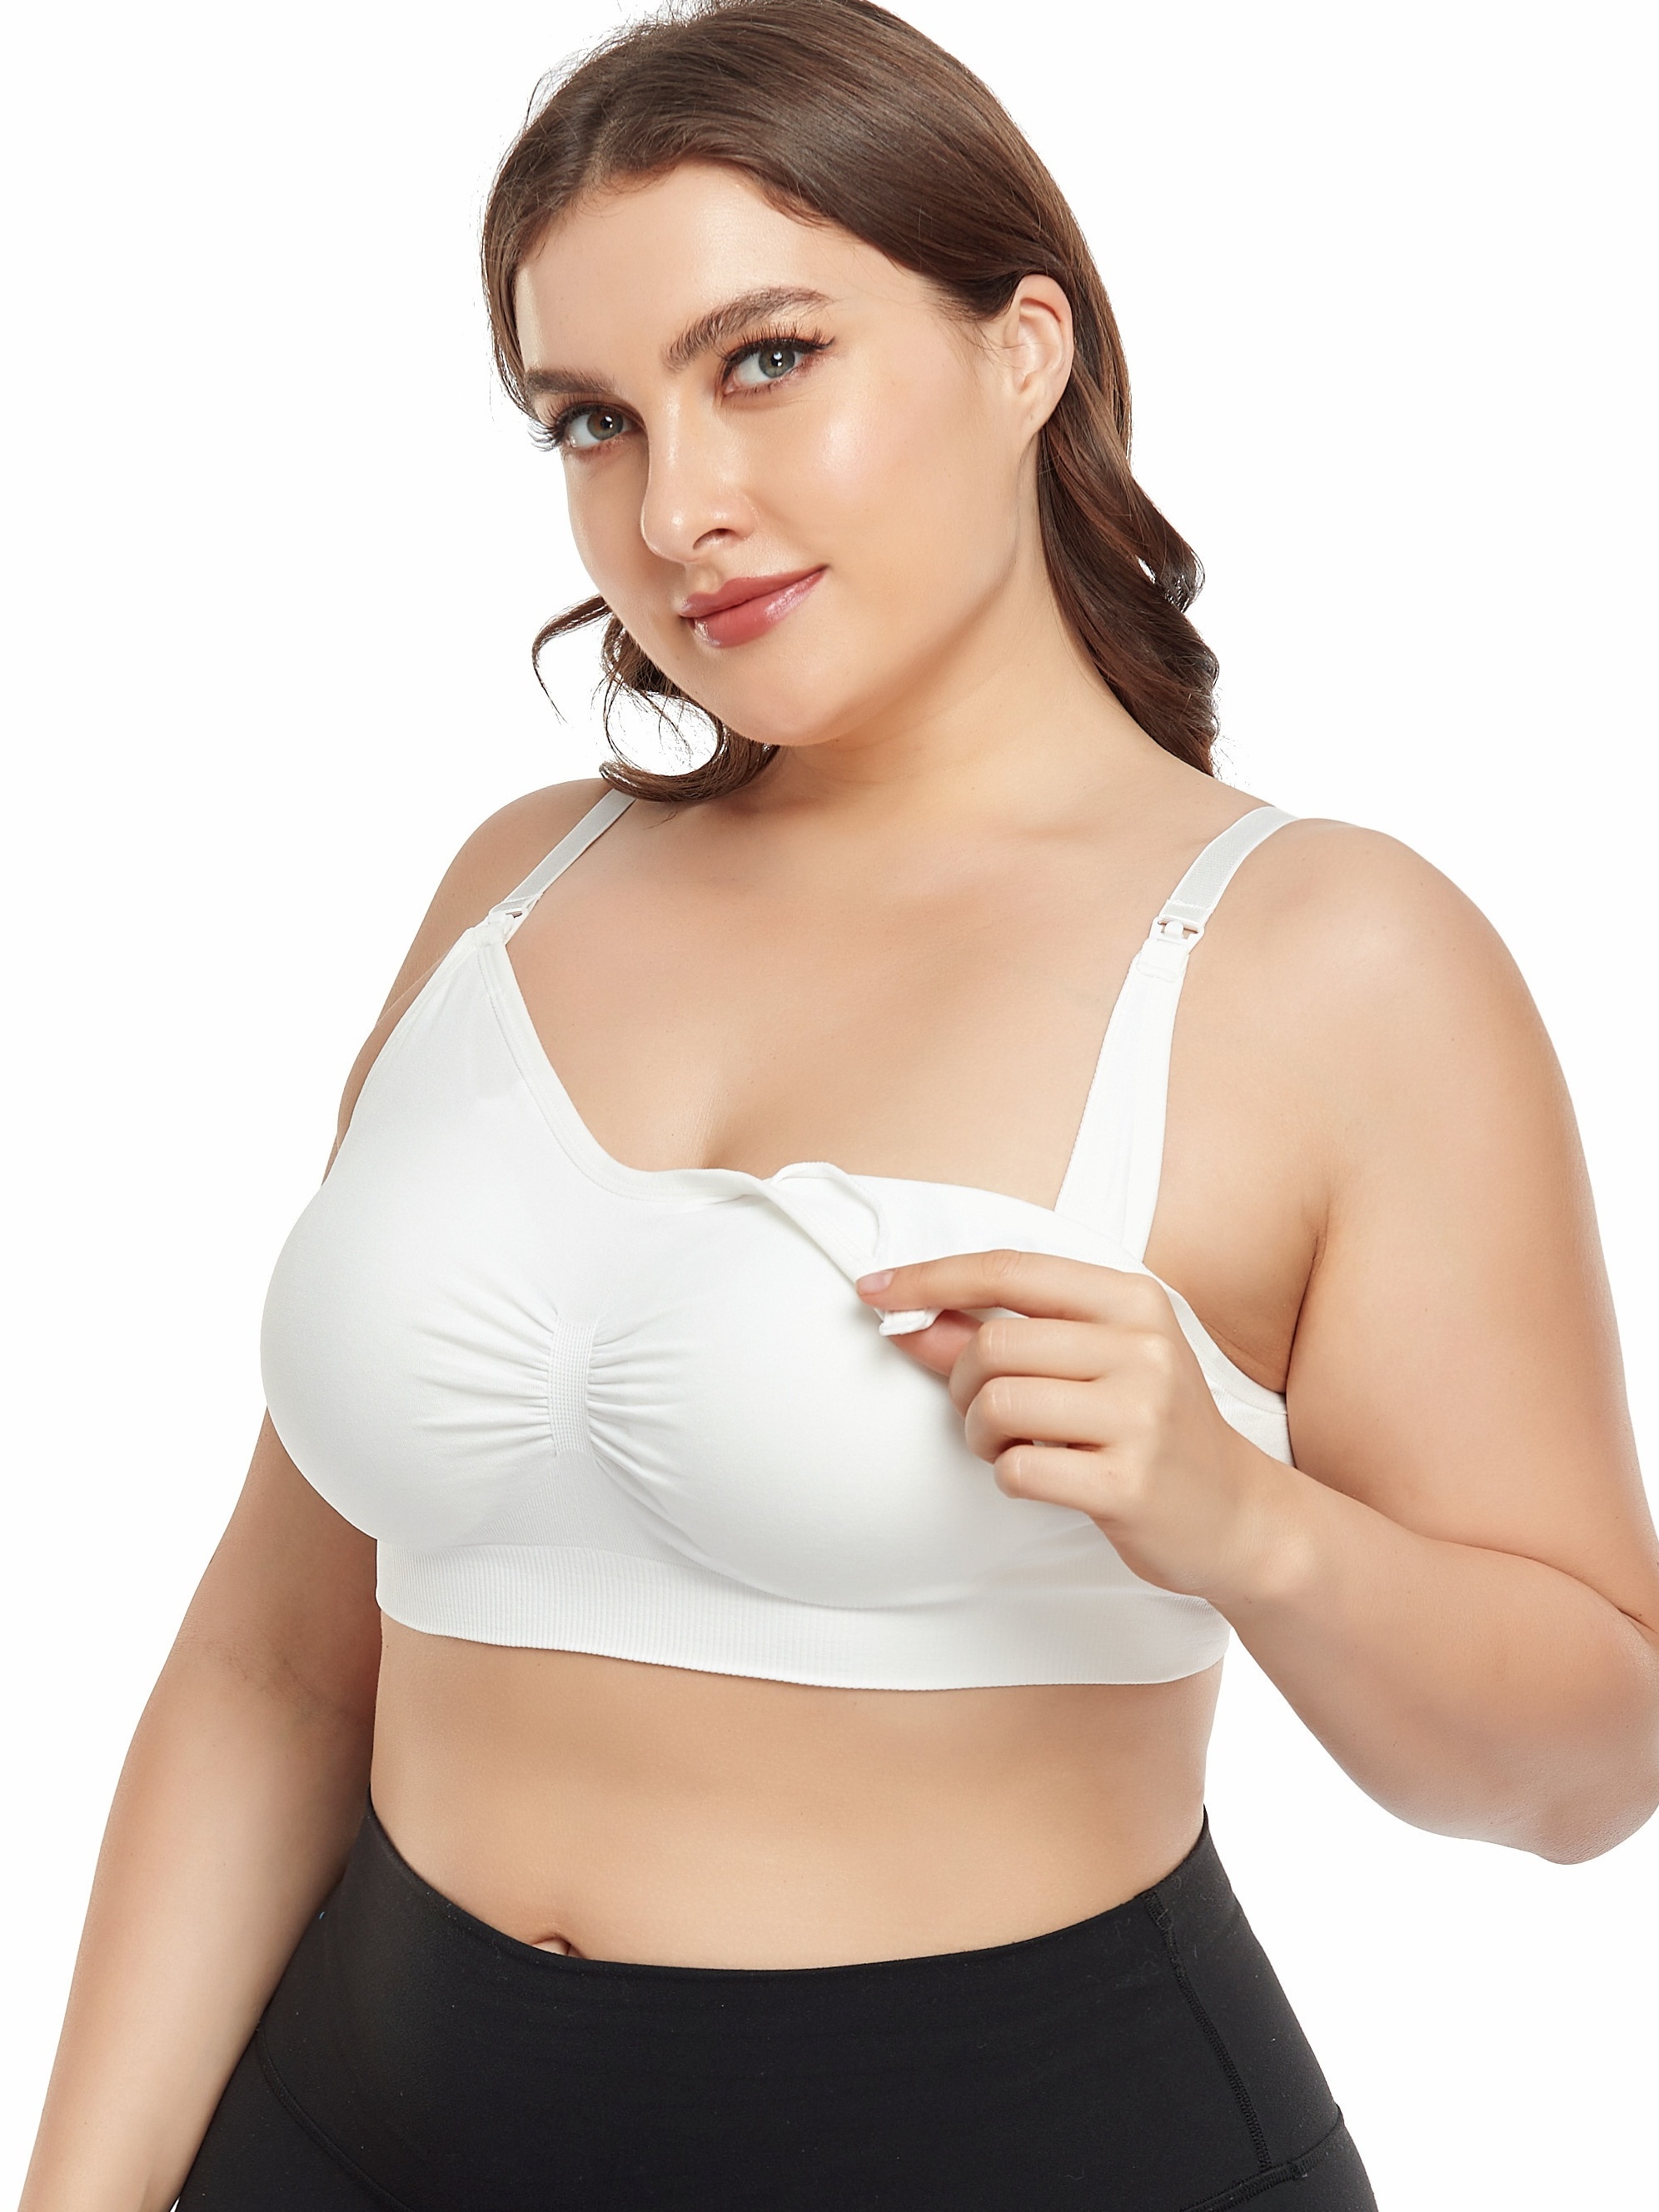 Wireless Maternity Nursing Bra With Padded Shoulder Straps For Plus Size  Breastfeeding And Sagging Relief From Shu08, $16.78